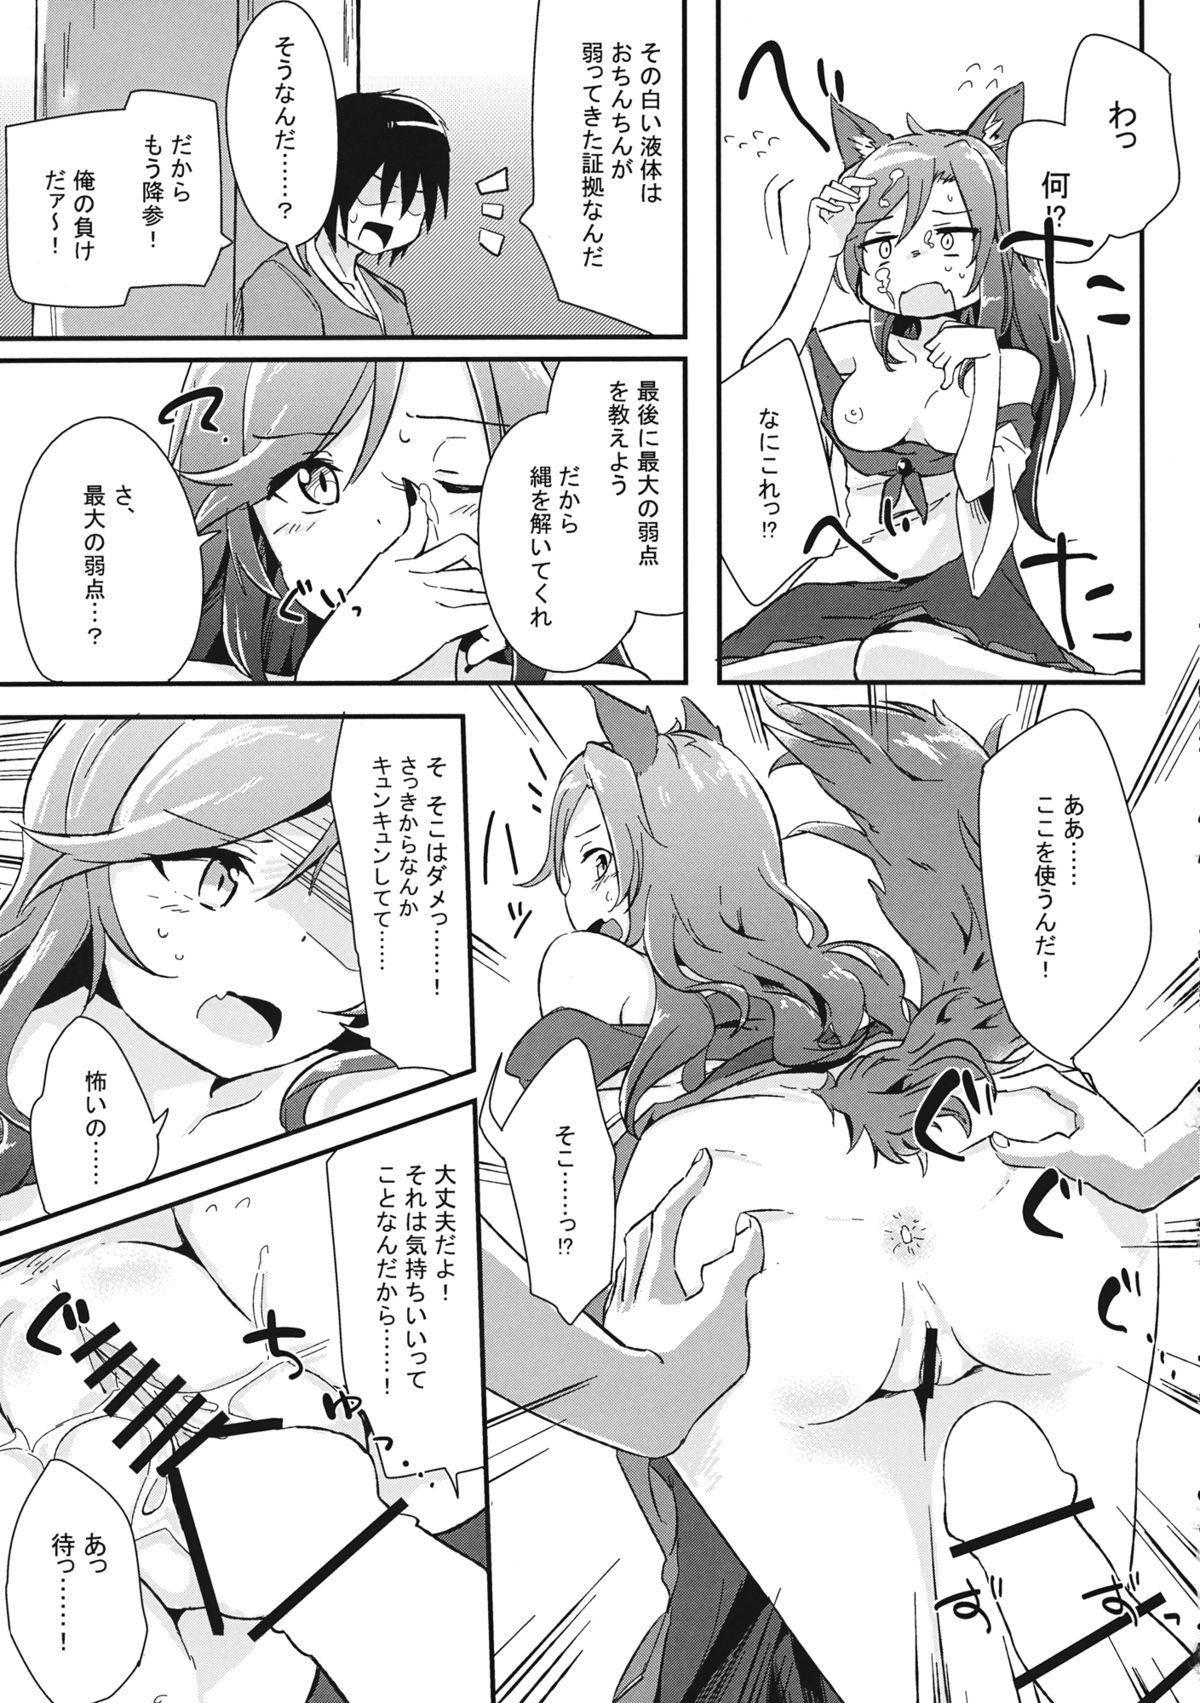 Touhou Muchi Shichu Goudou - Toho joint magazine sex in the ignorant situations 20